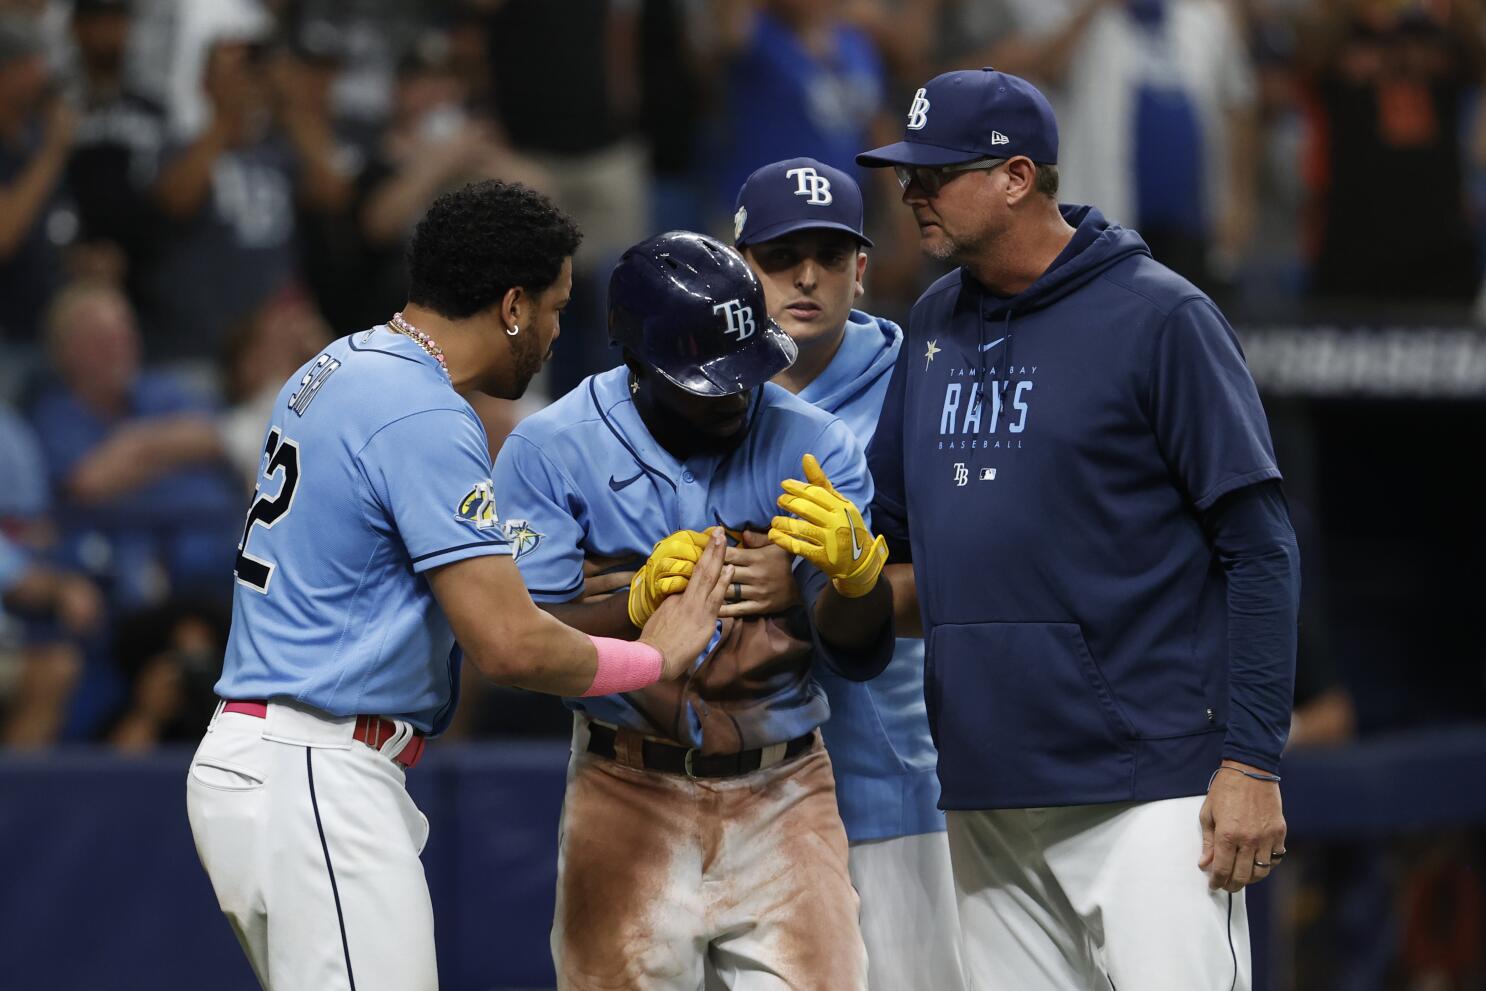 How Rays will approach getting through their latest pitcher shortfall